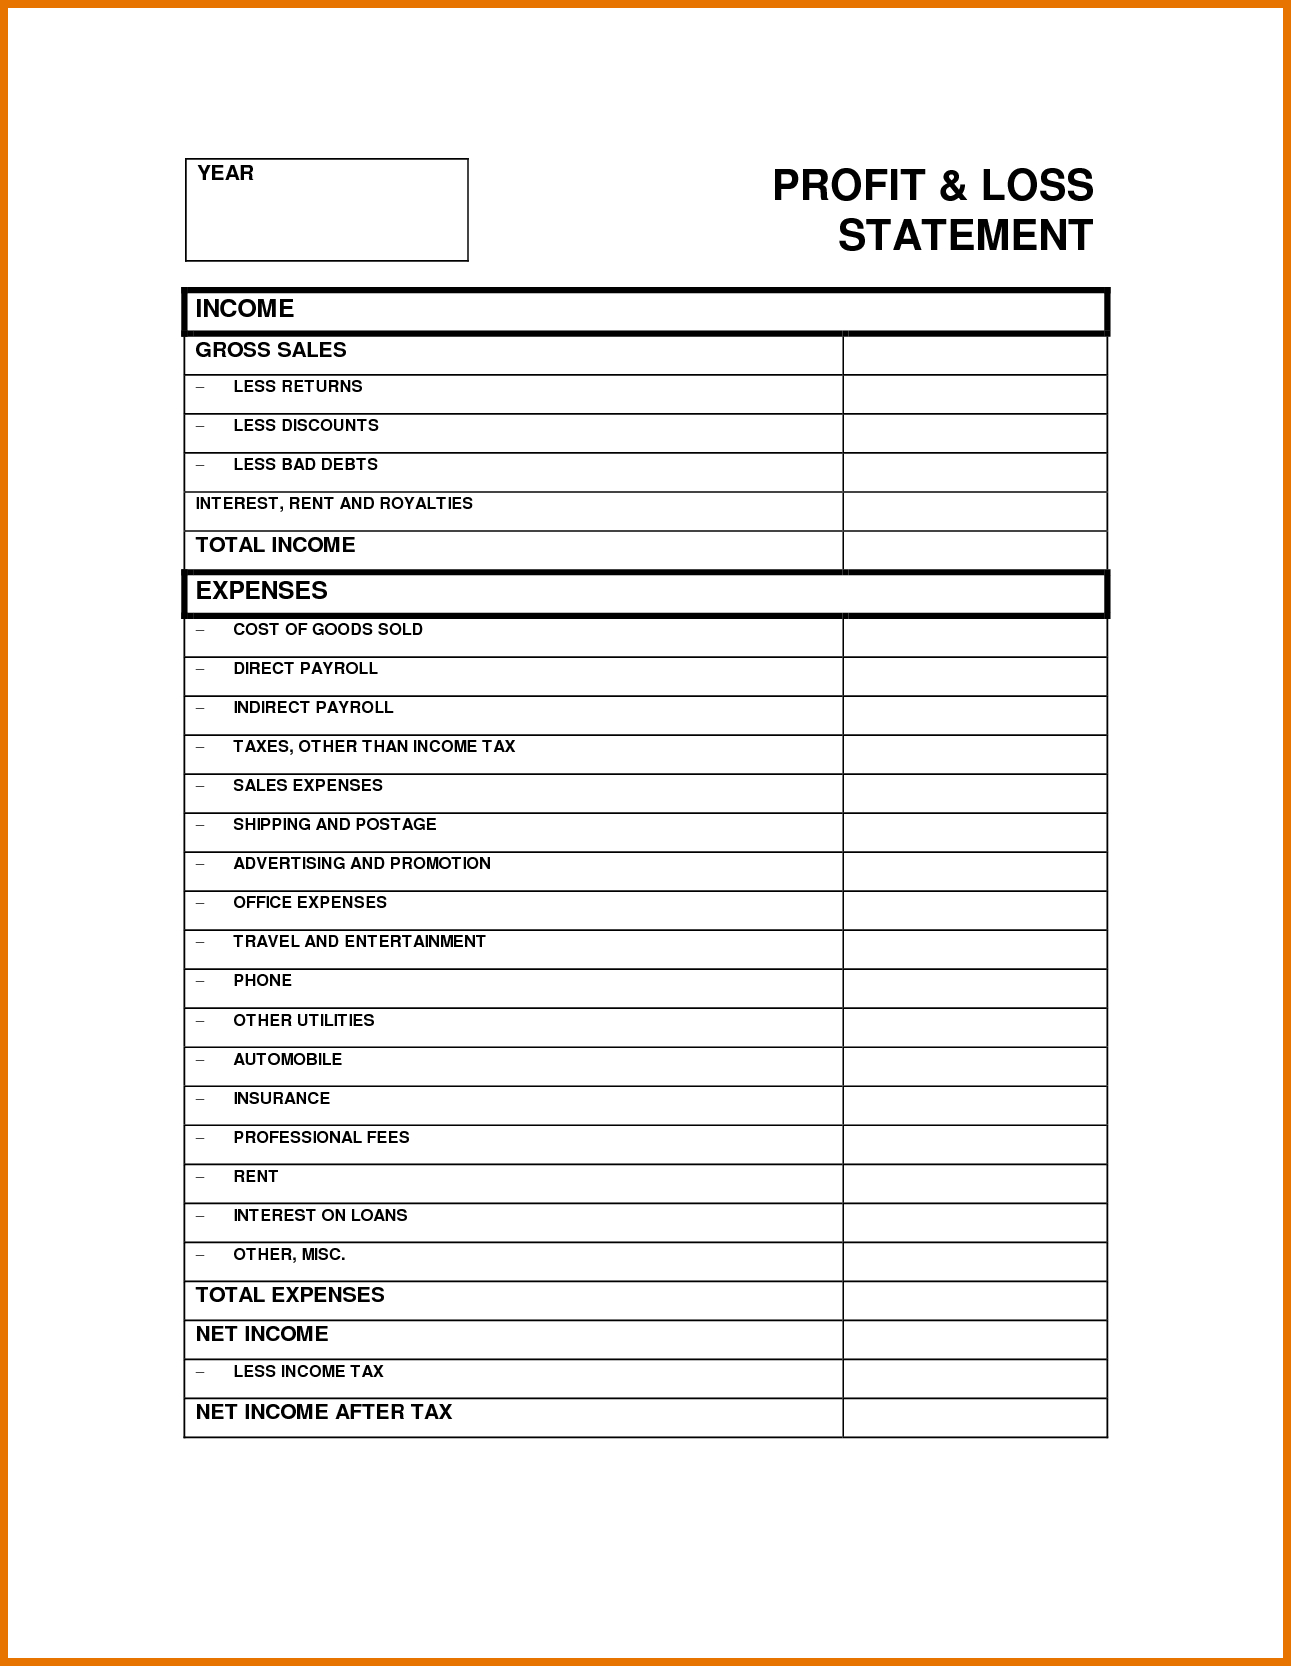 009 P L Template Ideas And Imposing Statement Pl Hotel  Statements Inside Free Profit And Loss Worksheet